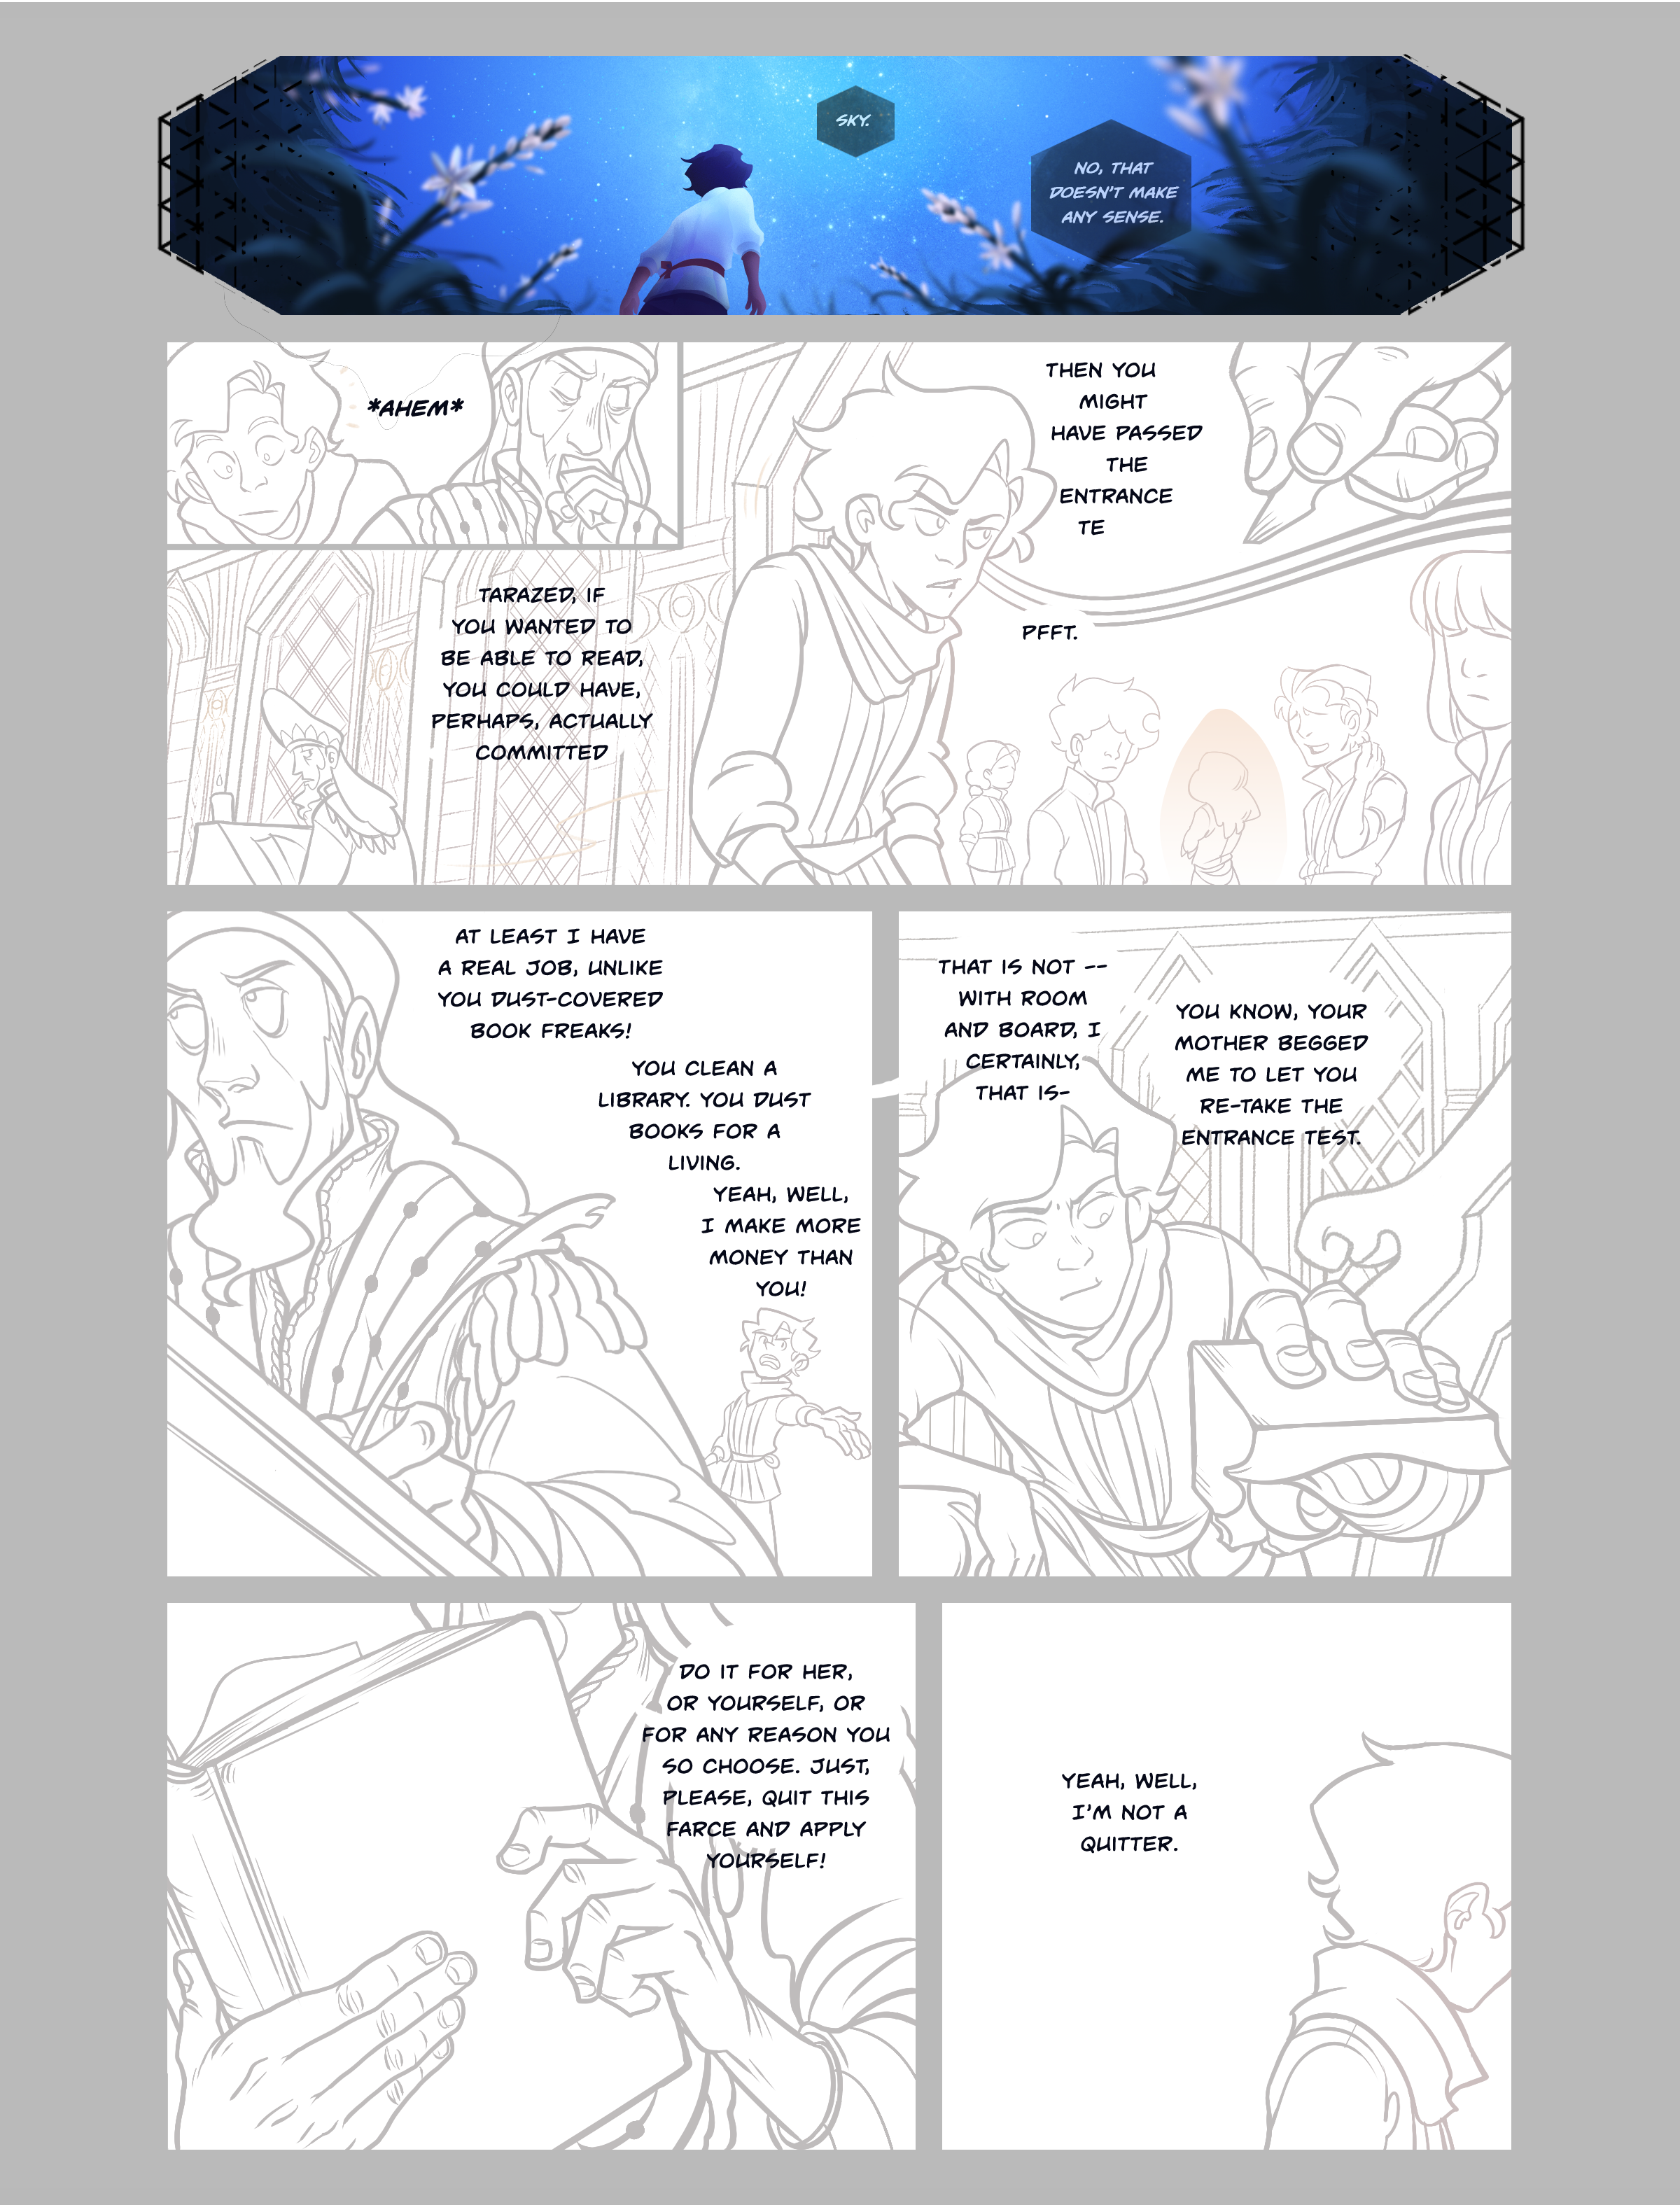  The same process occurs with the thumbnails in reverse. Zixing takes the script and draws out loose drafts which I then critique and give notes about. 